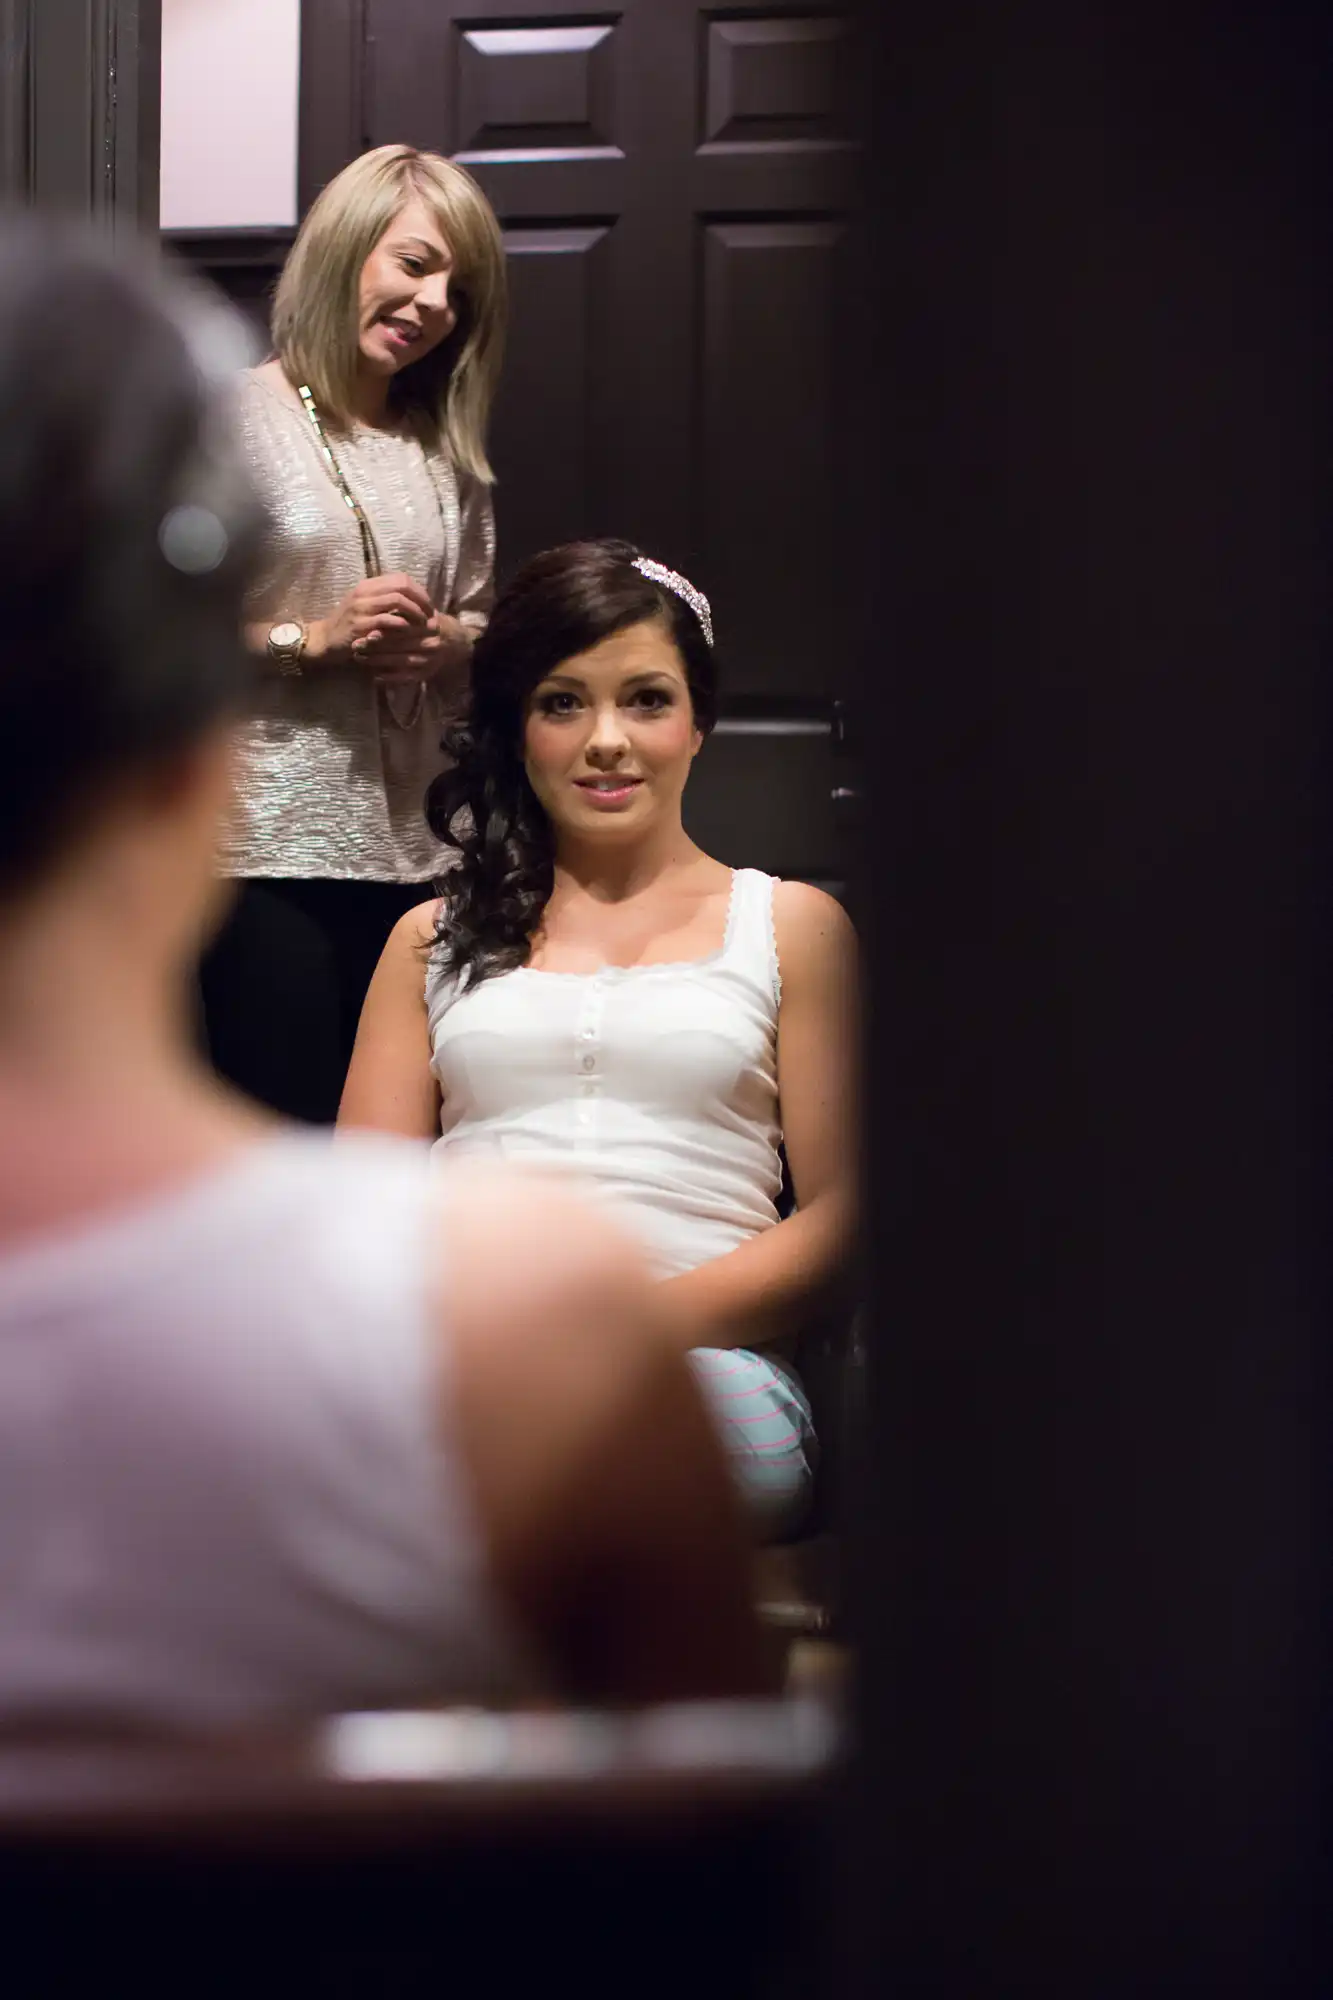 A woman sitting in front of a mirror, preparing her hair for an event, with another woman assisting her in the background.